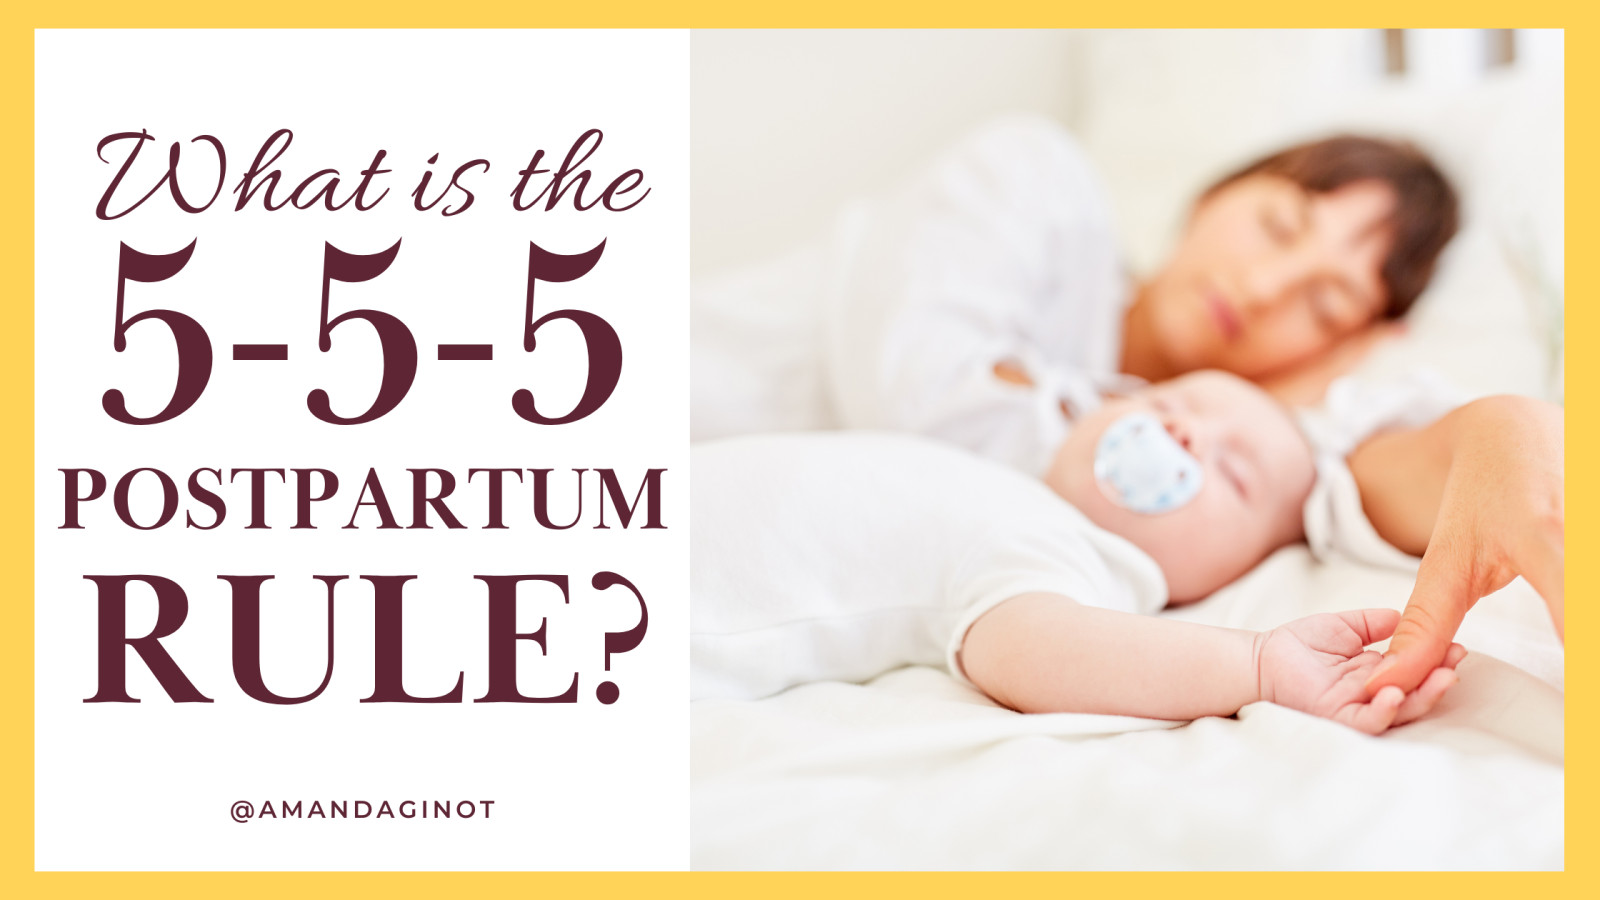 What is the 5-5-5 rule for postpartum?